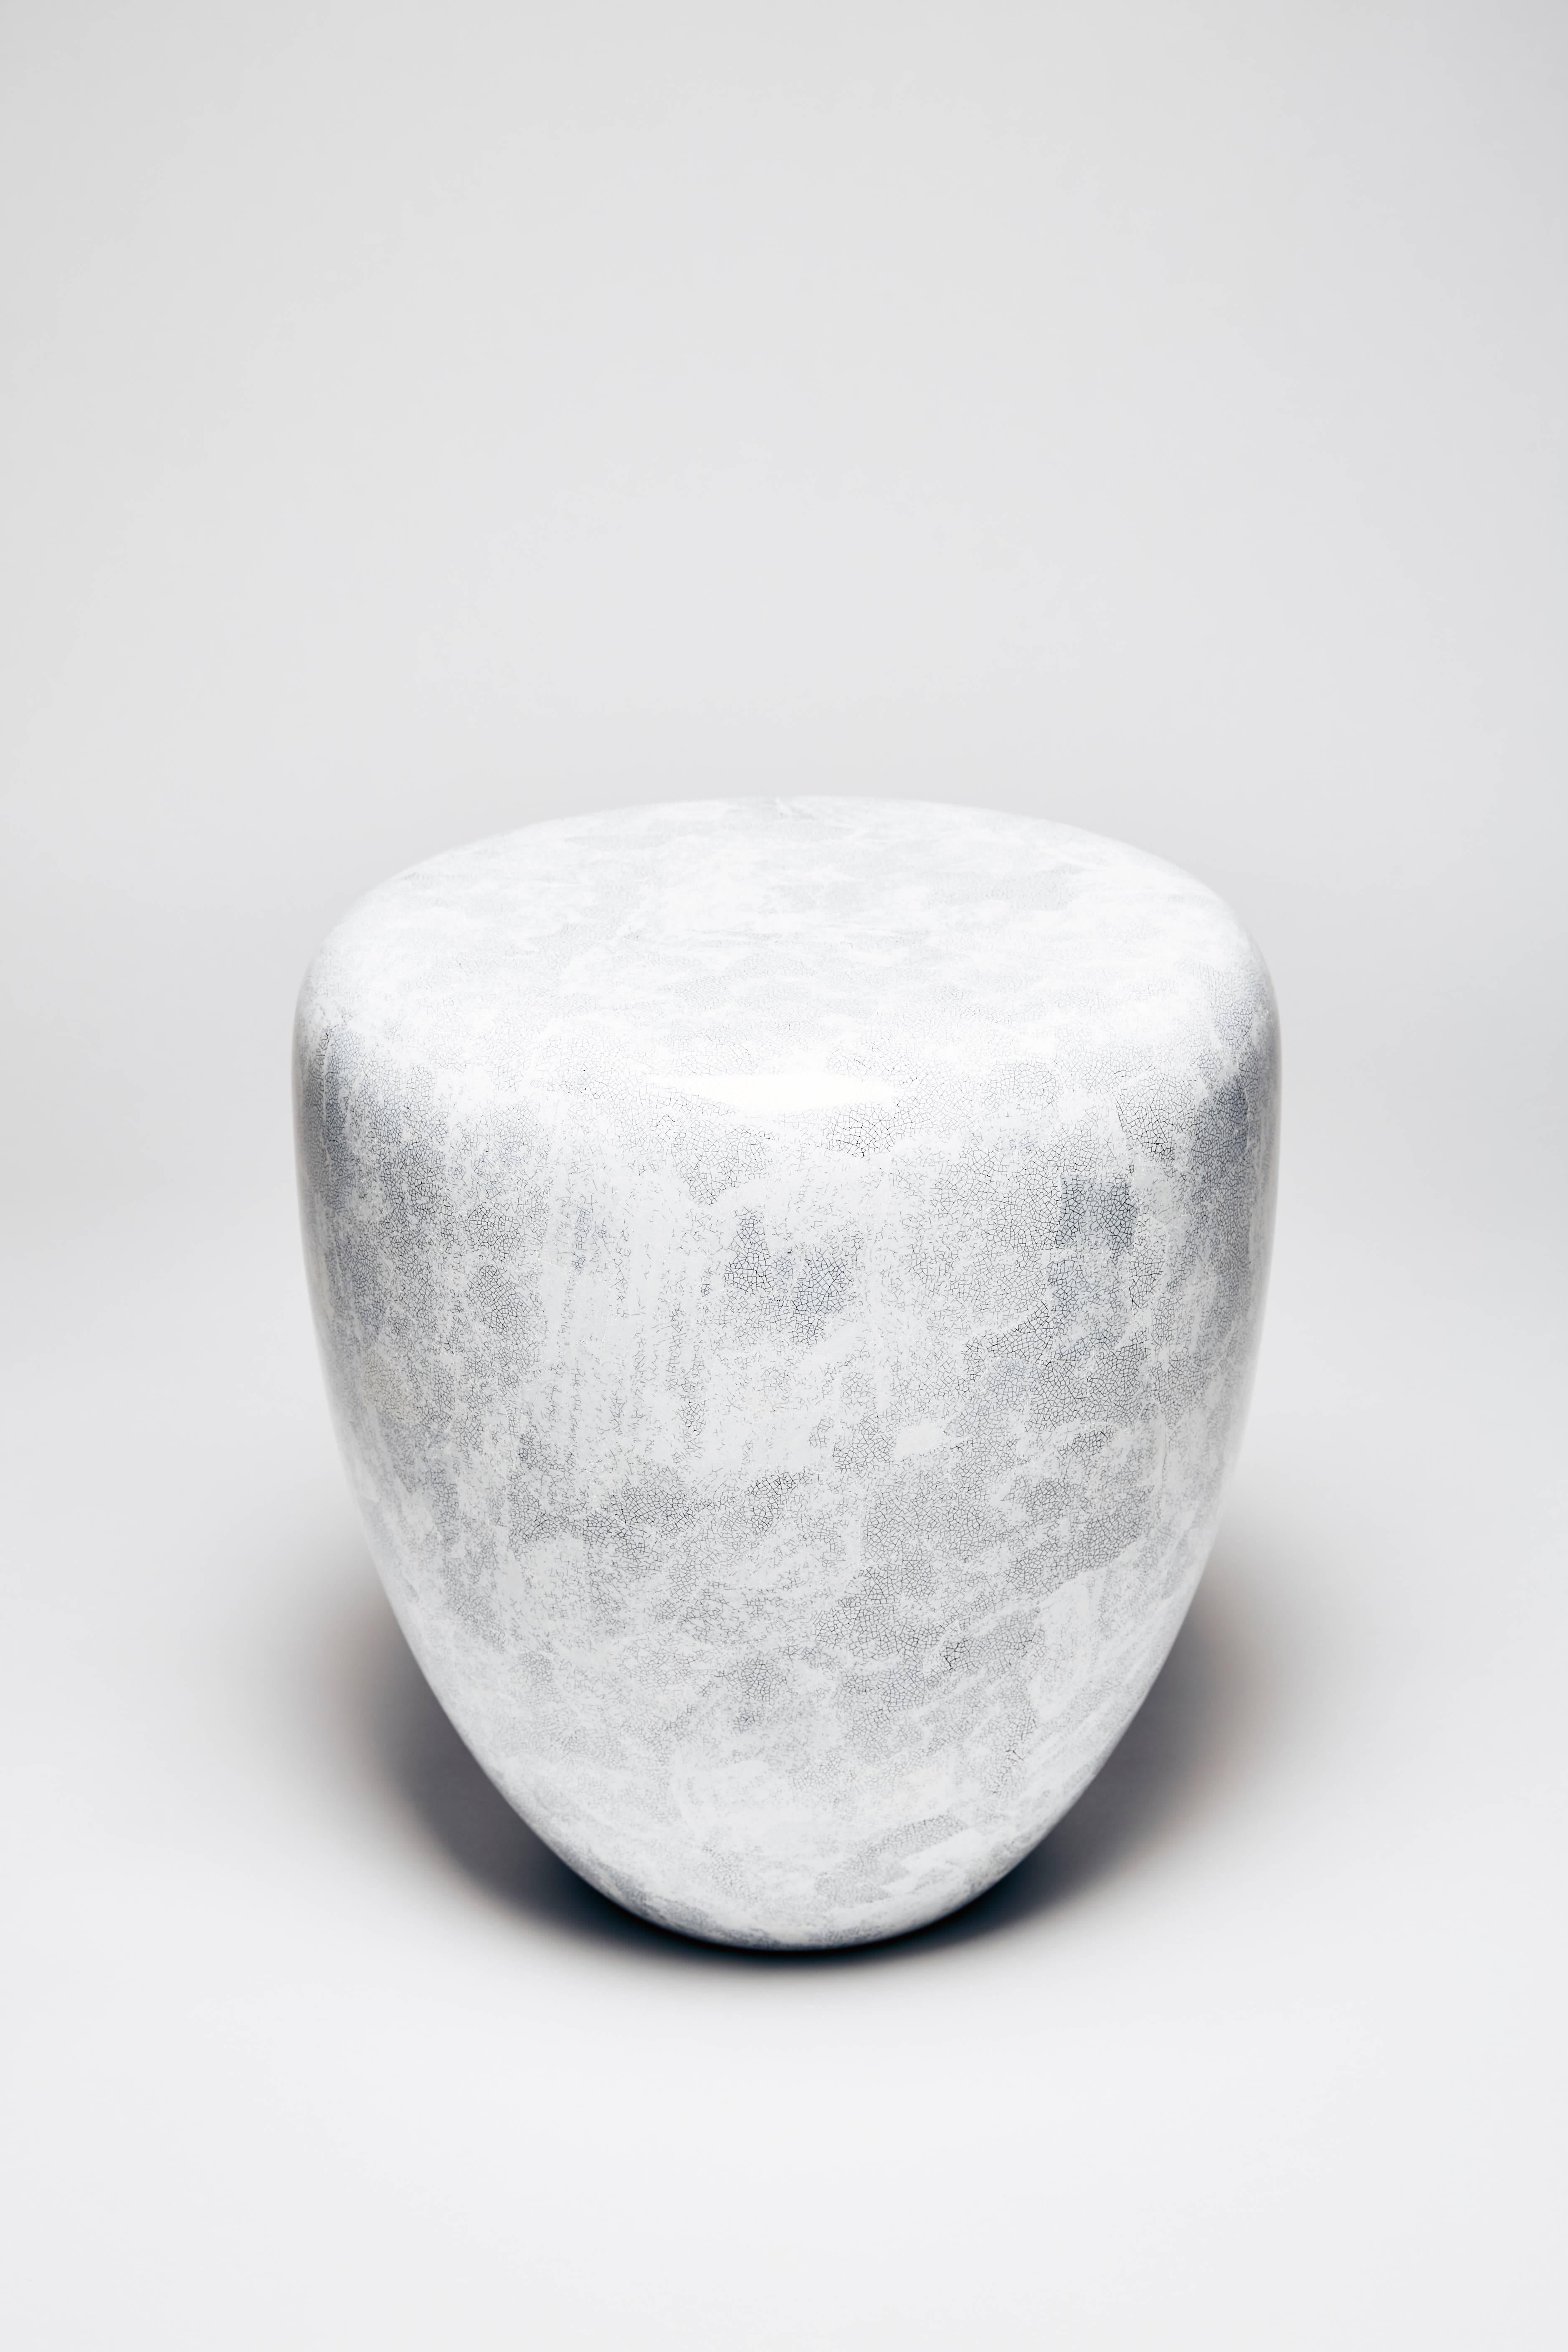 Contemporary Side Table, White Eggshell DOT by Reda Amalou Design, 2016-Glossy or mate For Sale